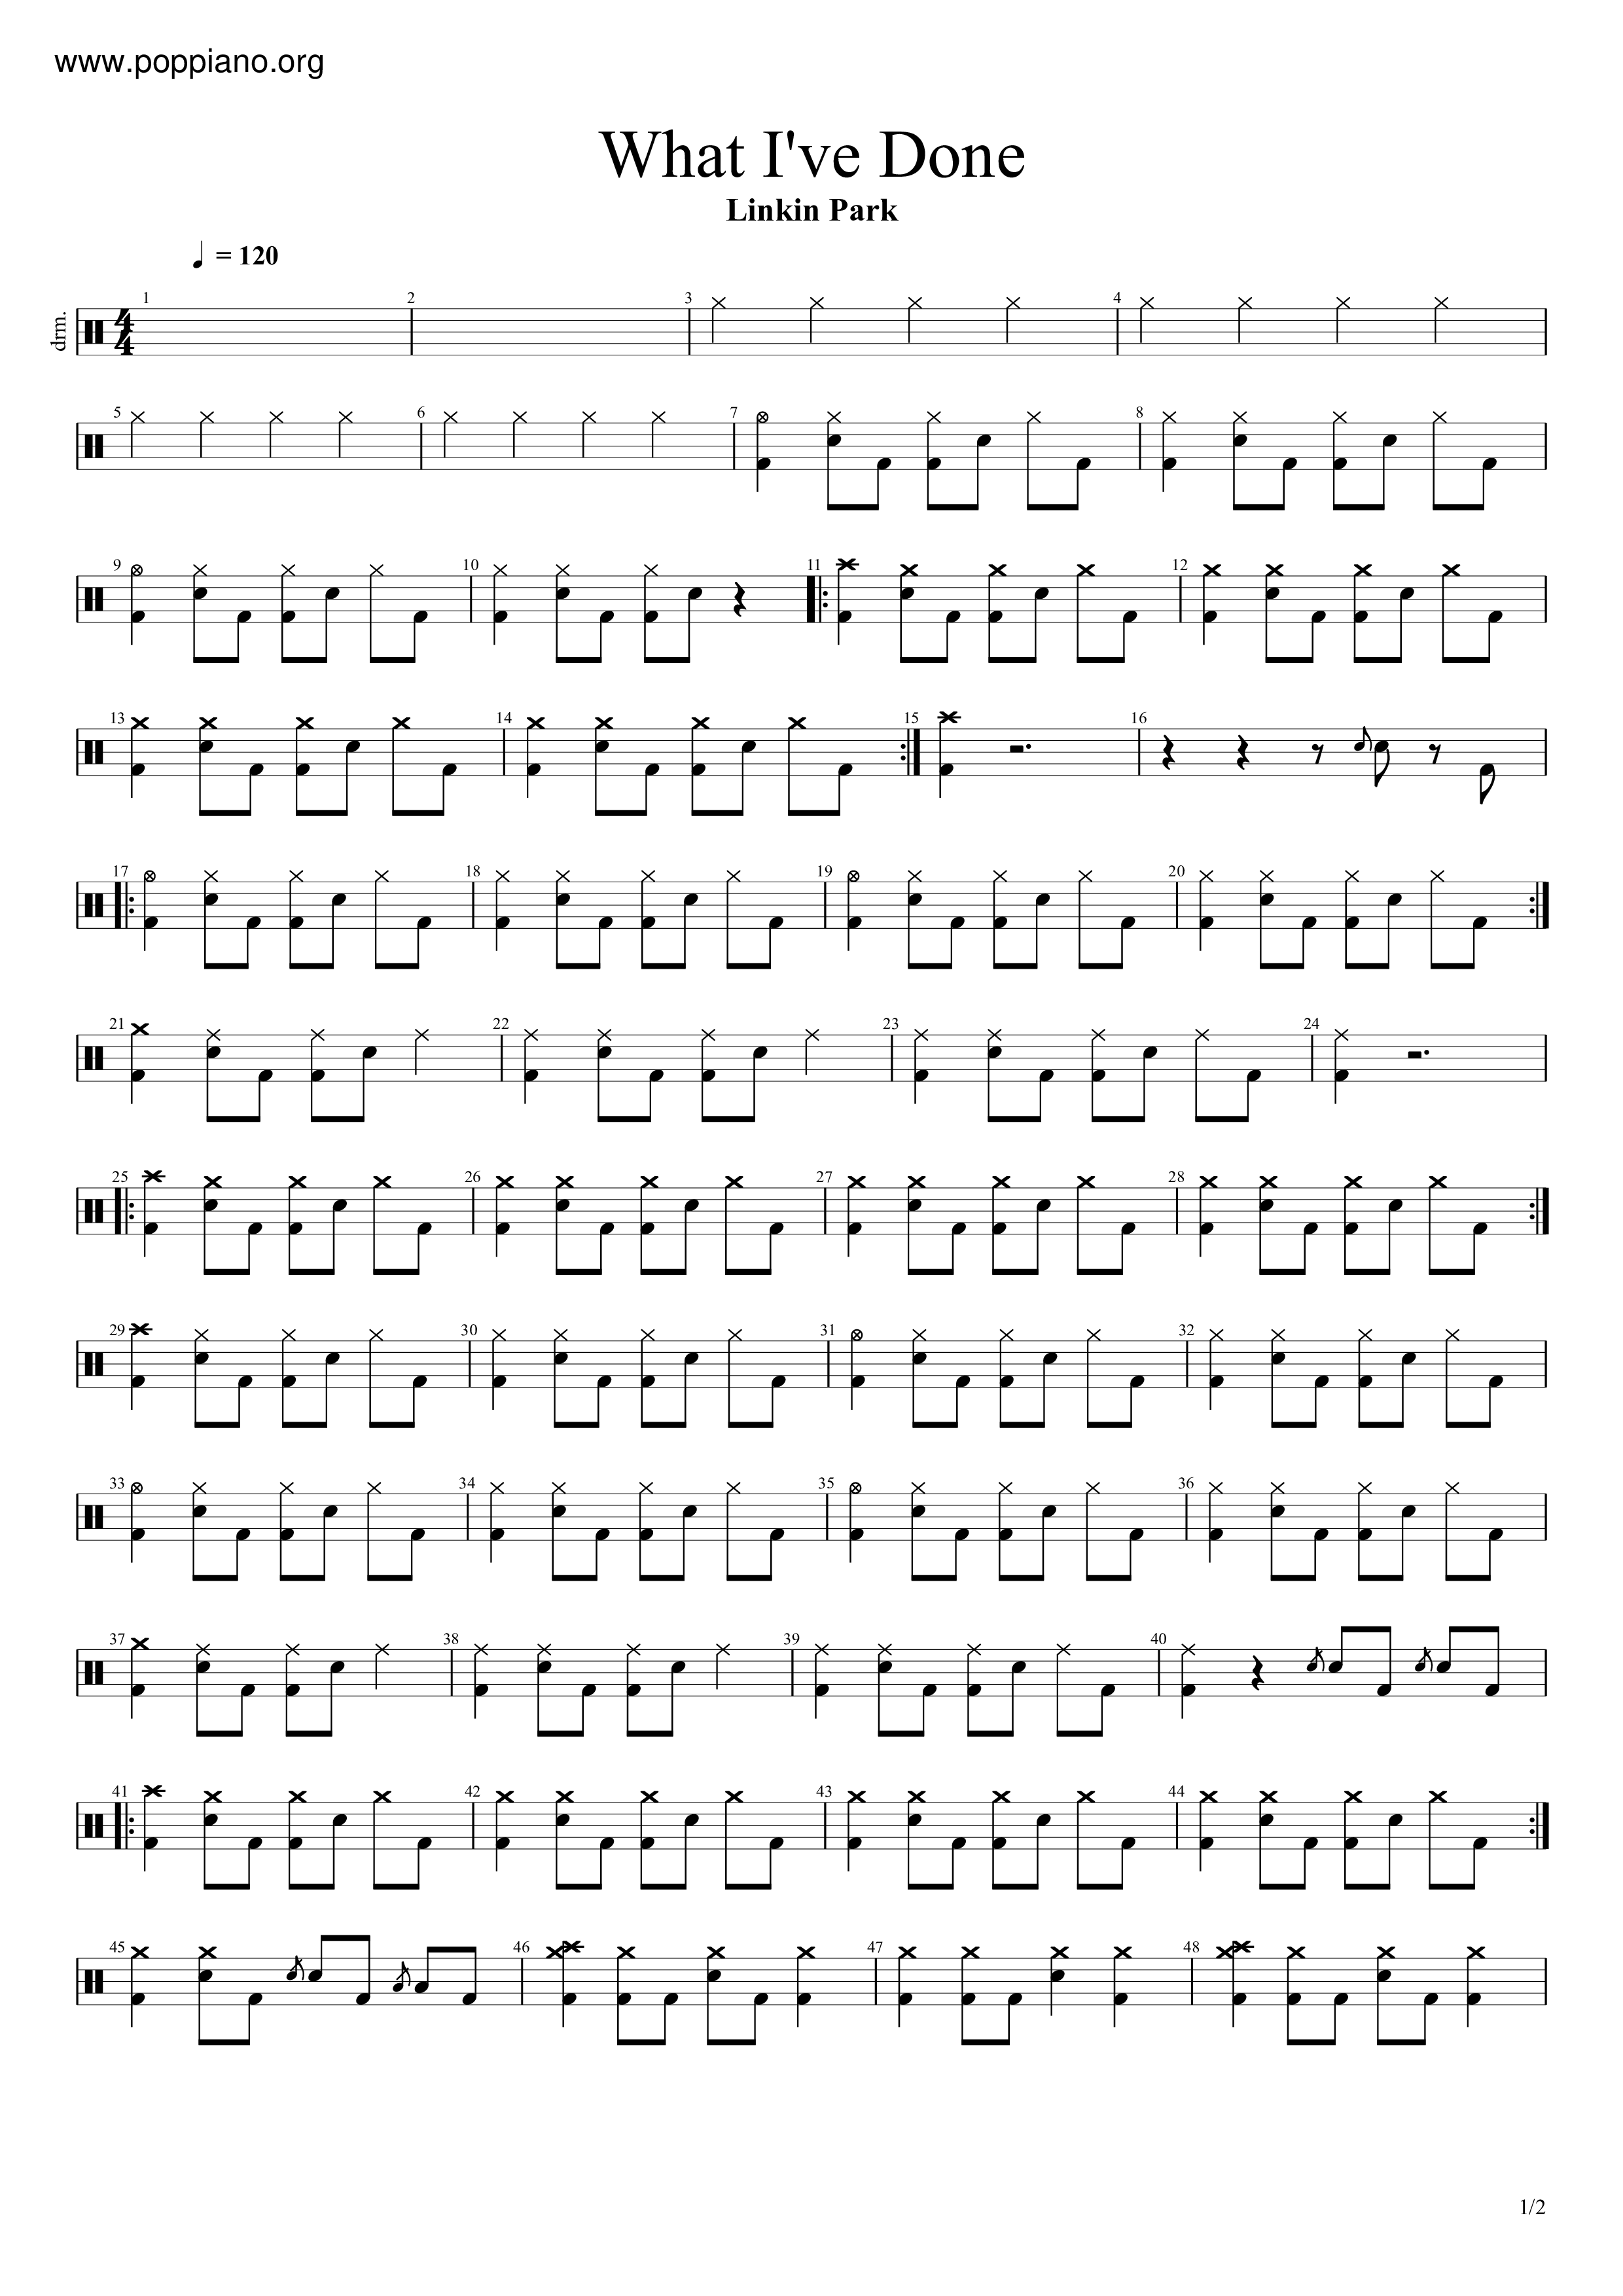 Fighting Myself – Linkin Park Sheet music for Drum group (Solo)